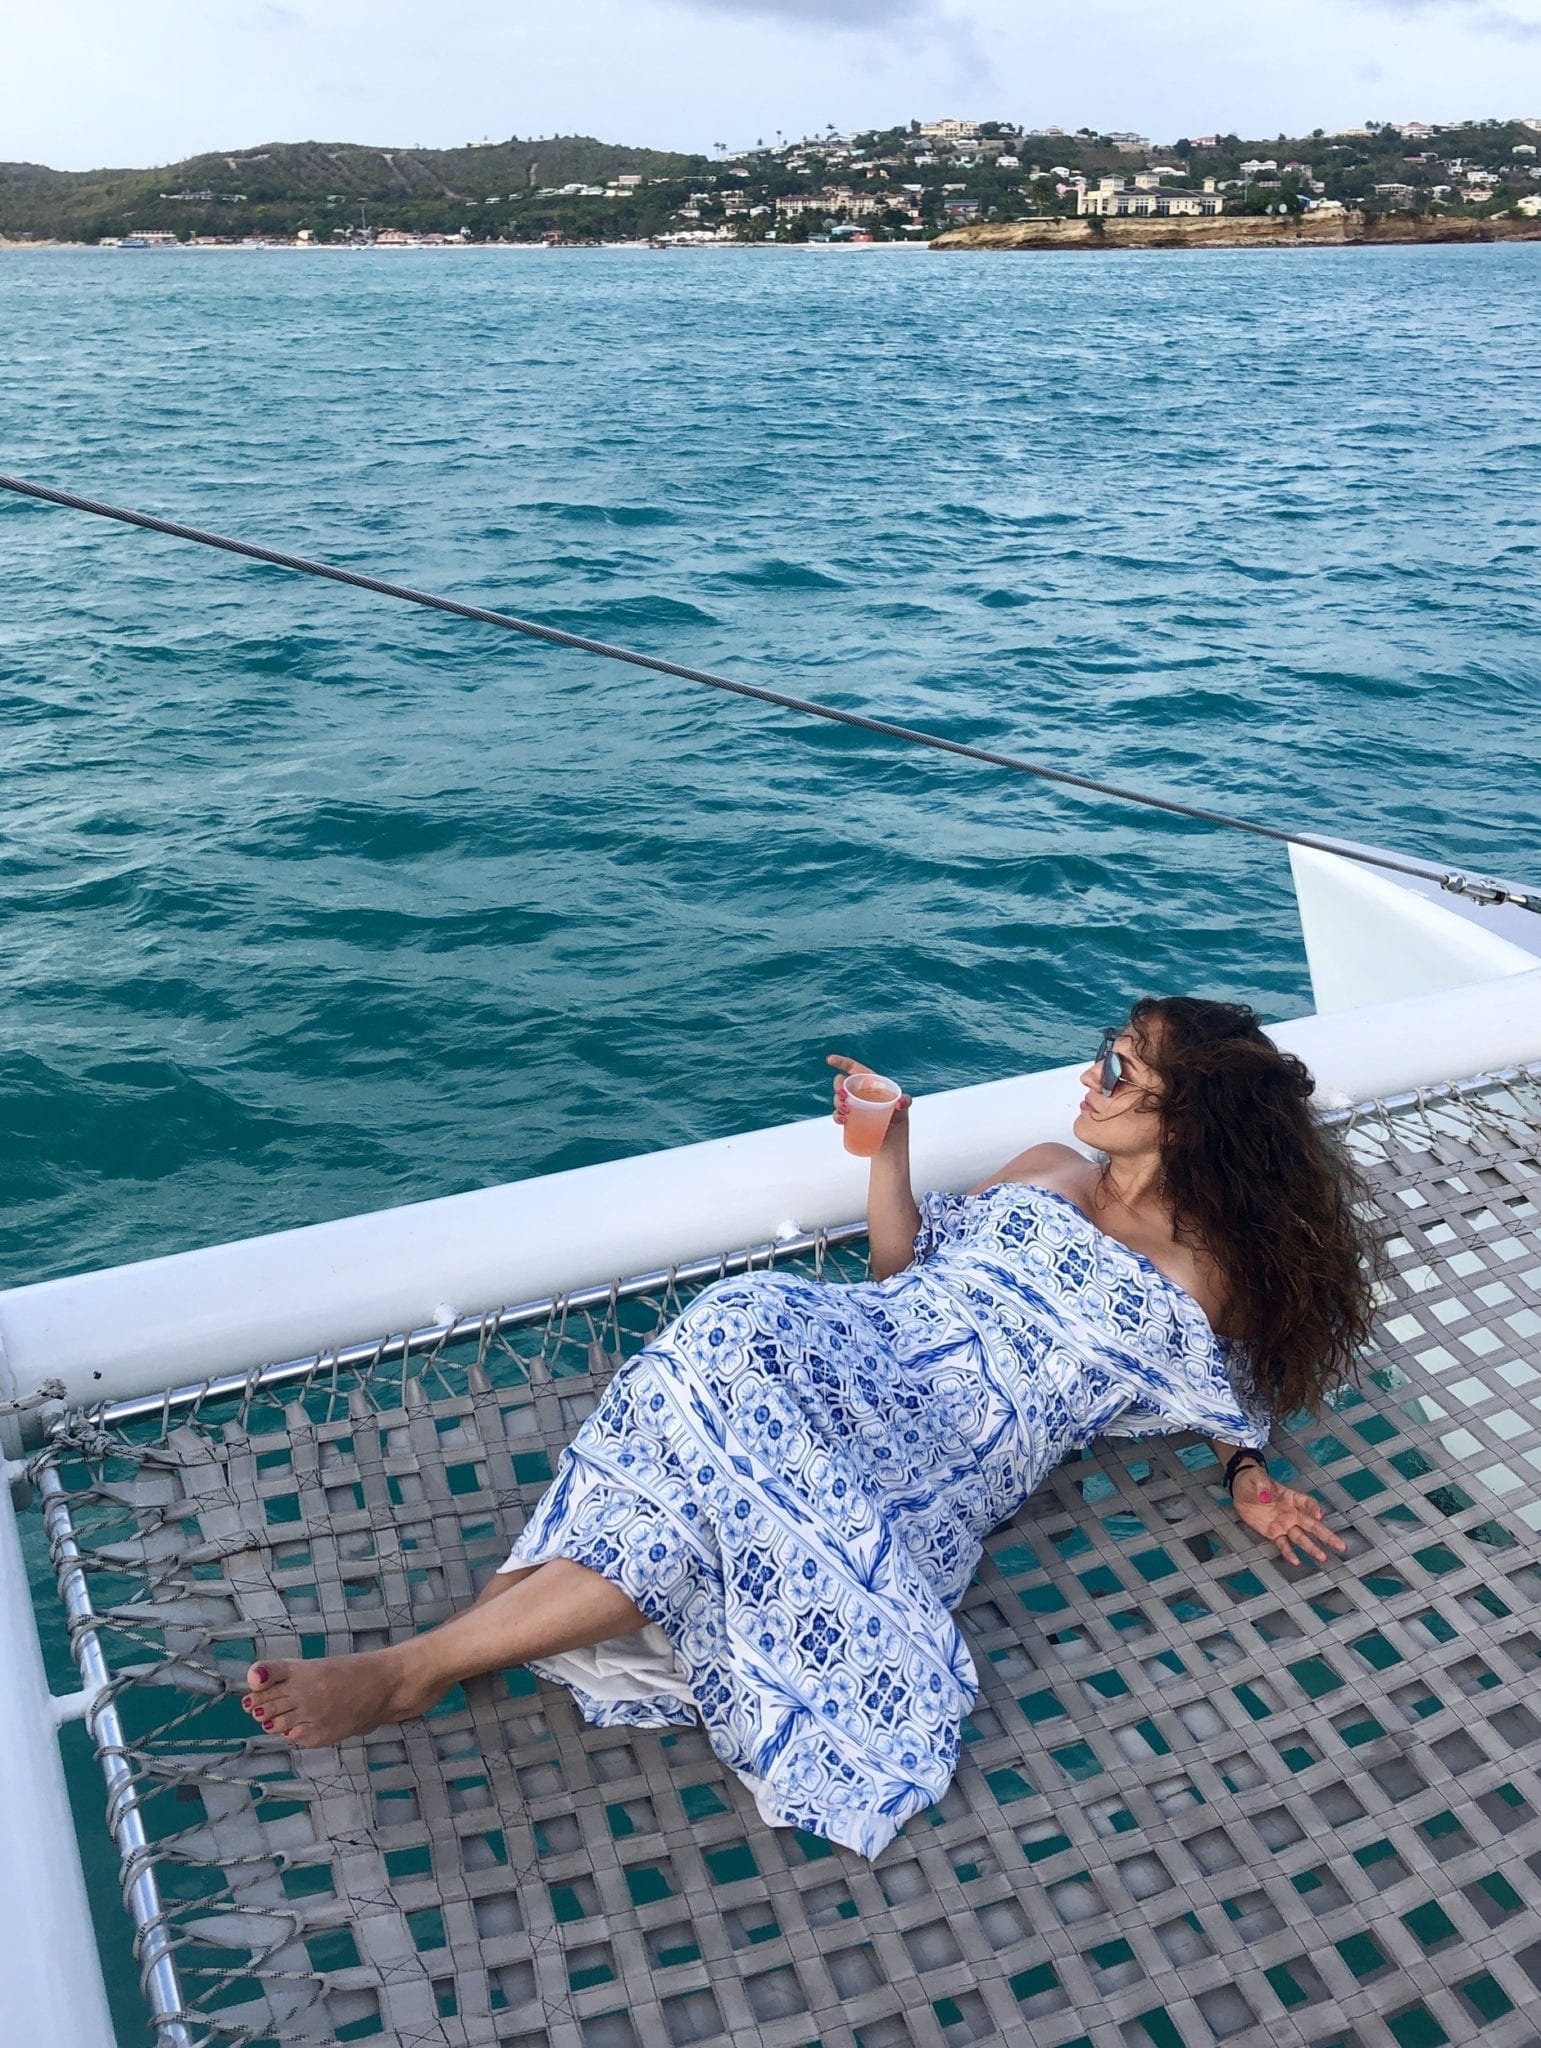 Kate lying down on a net on the end of a catamaran, wearing an off the shoulder white and blue patterned dress, hair long and curly, leaning on her elbows, holding a plastic cup of rum punch in one hand, and staring off into the distance -- turquoise sea and green land in the distance.